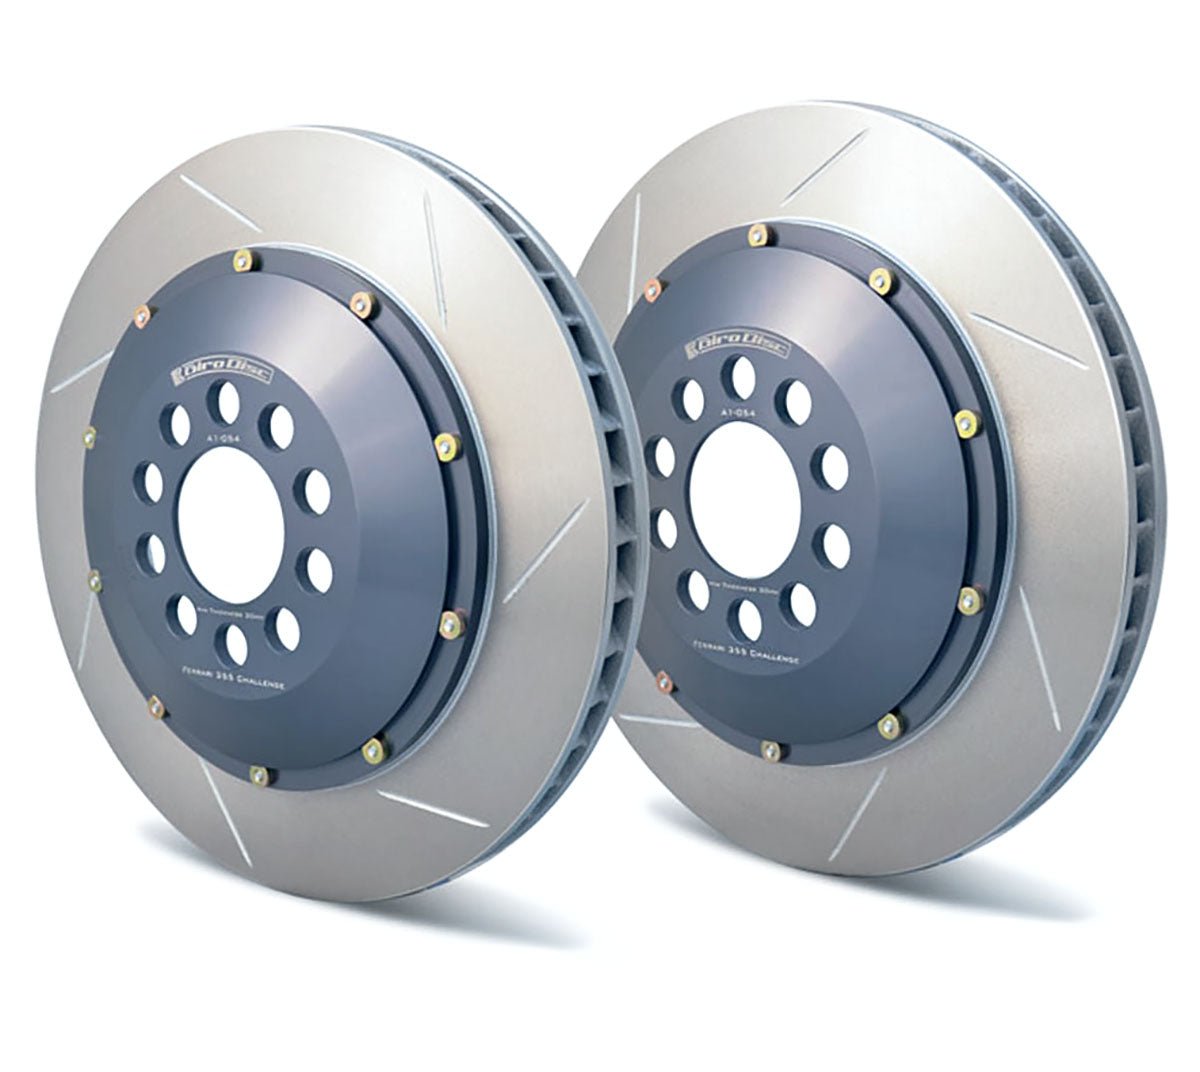 A1-054 Girodisc 2pc Front Brake Rotors - Competition Motorsport